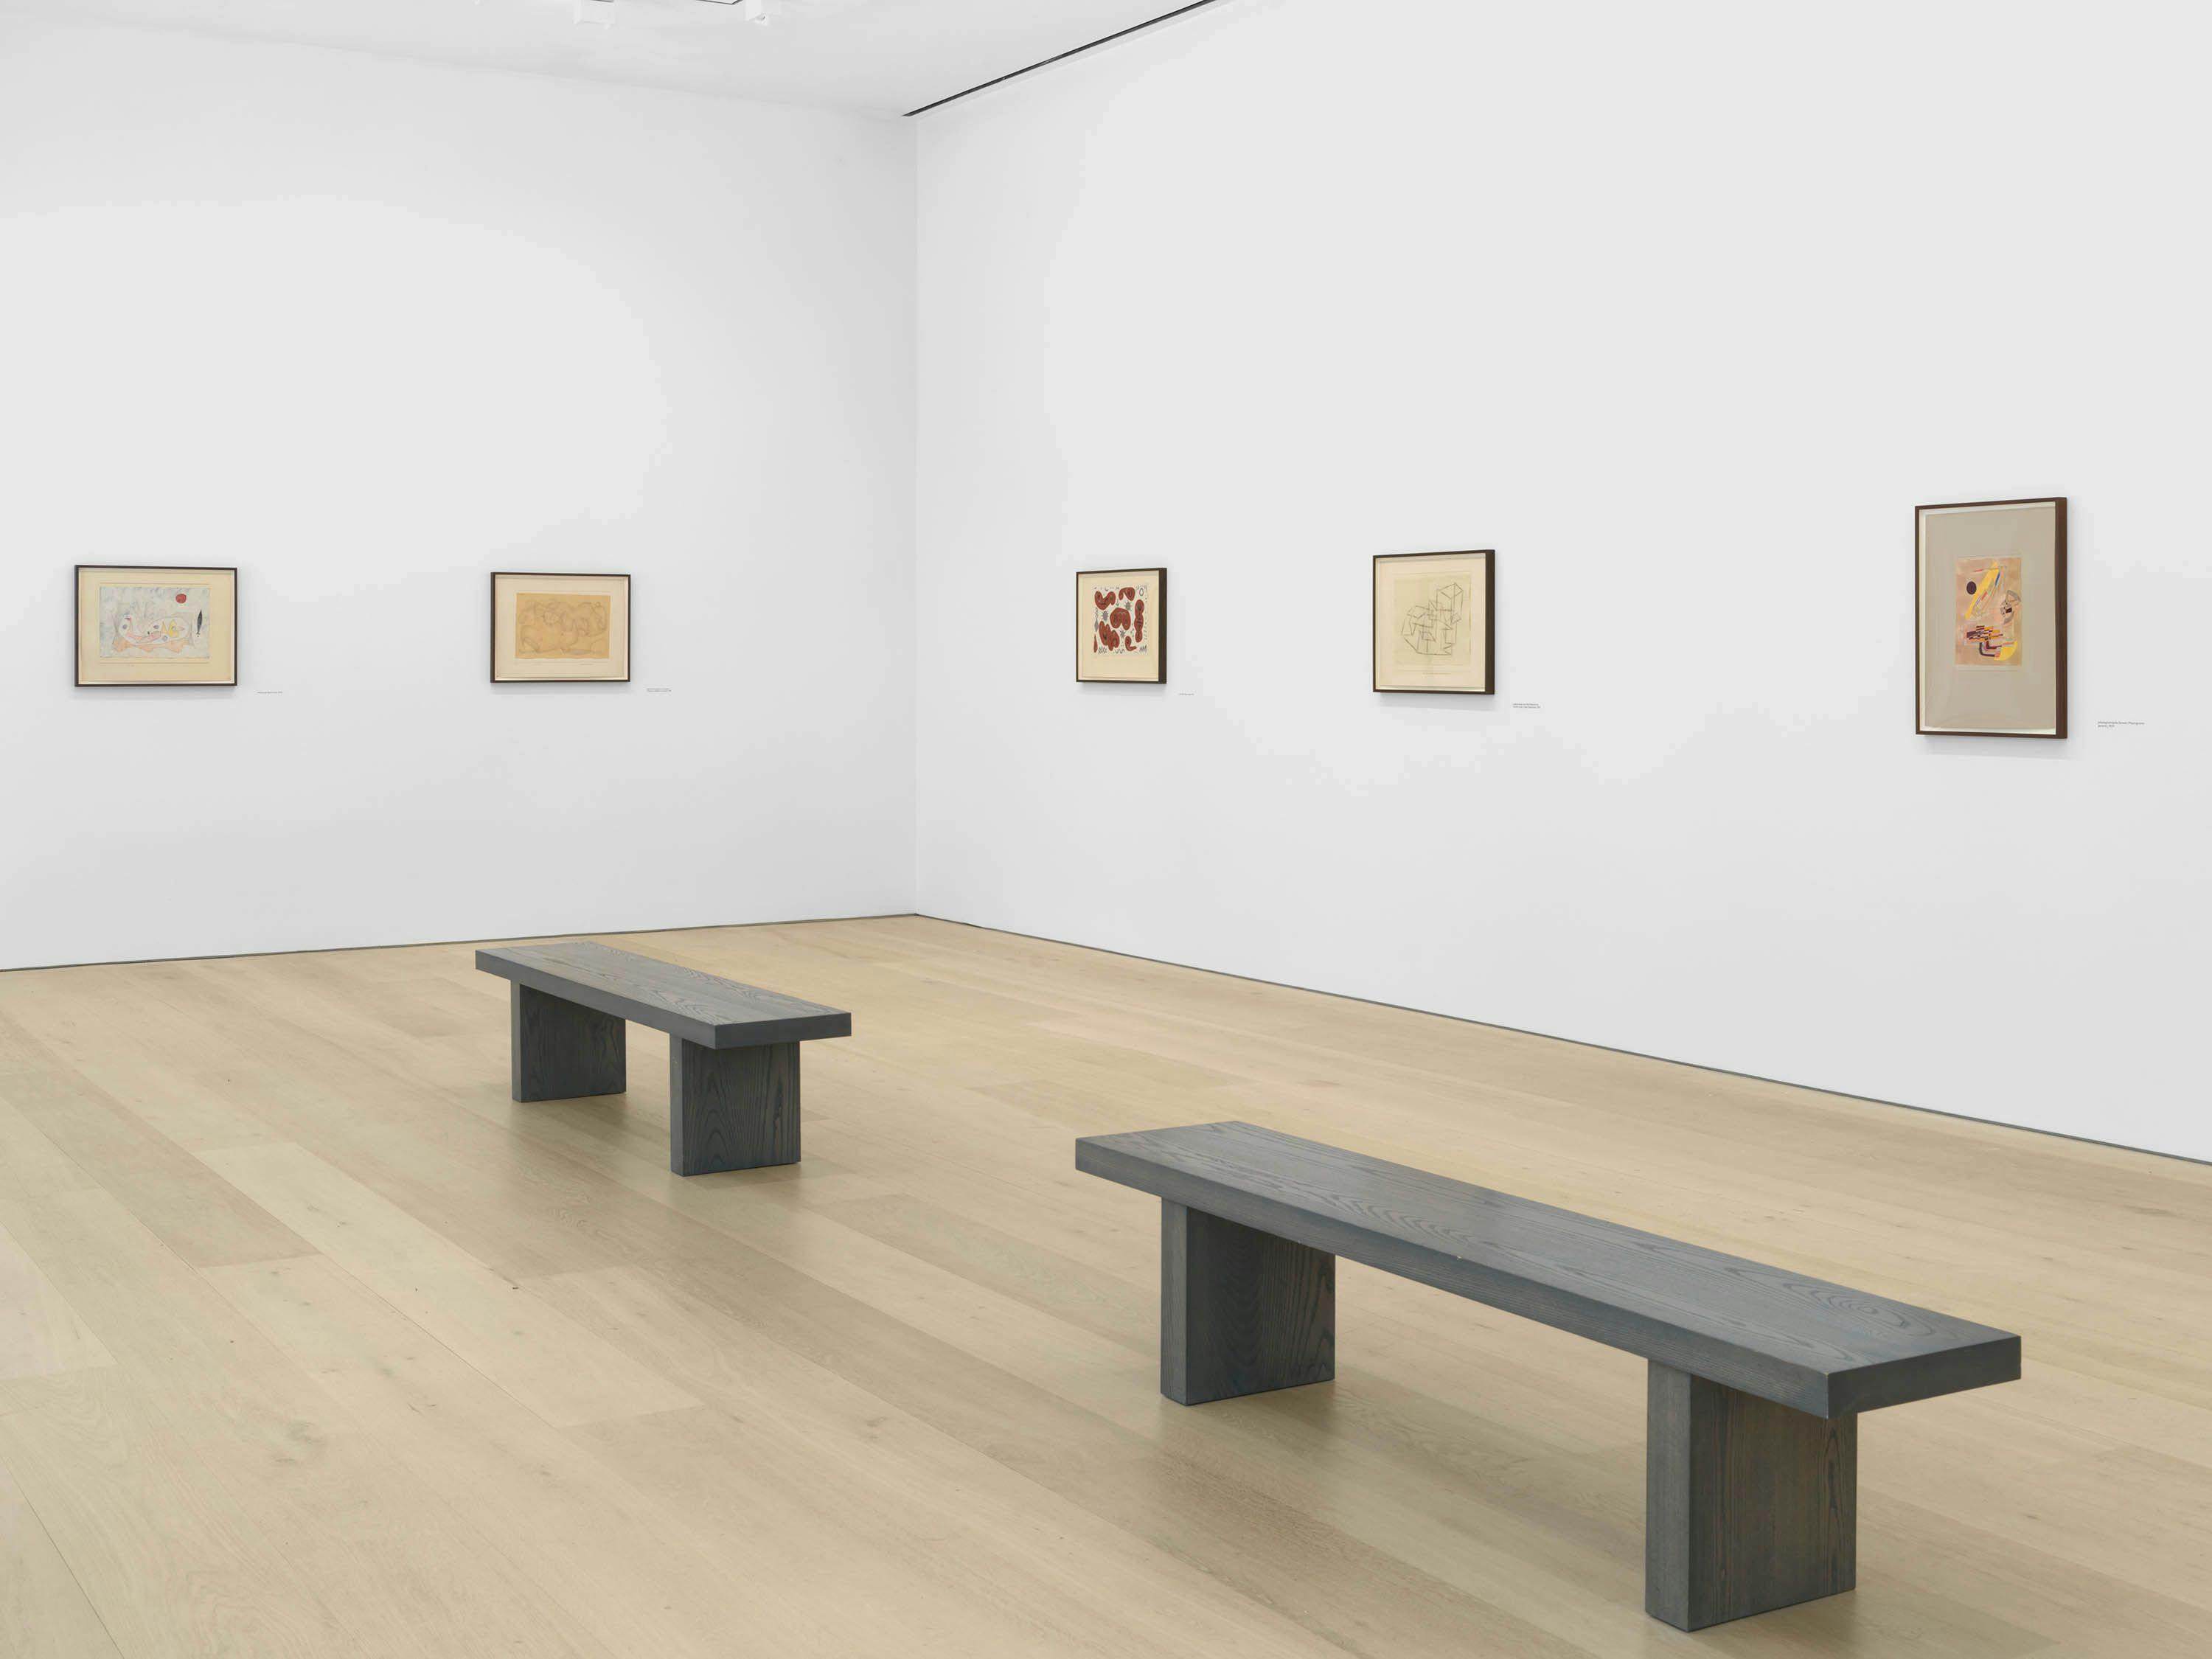 An installation view of works on paper by Paul Klee at David Zwirner in New York